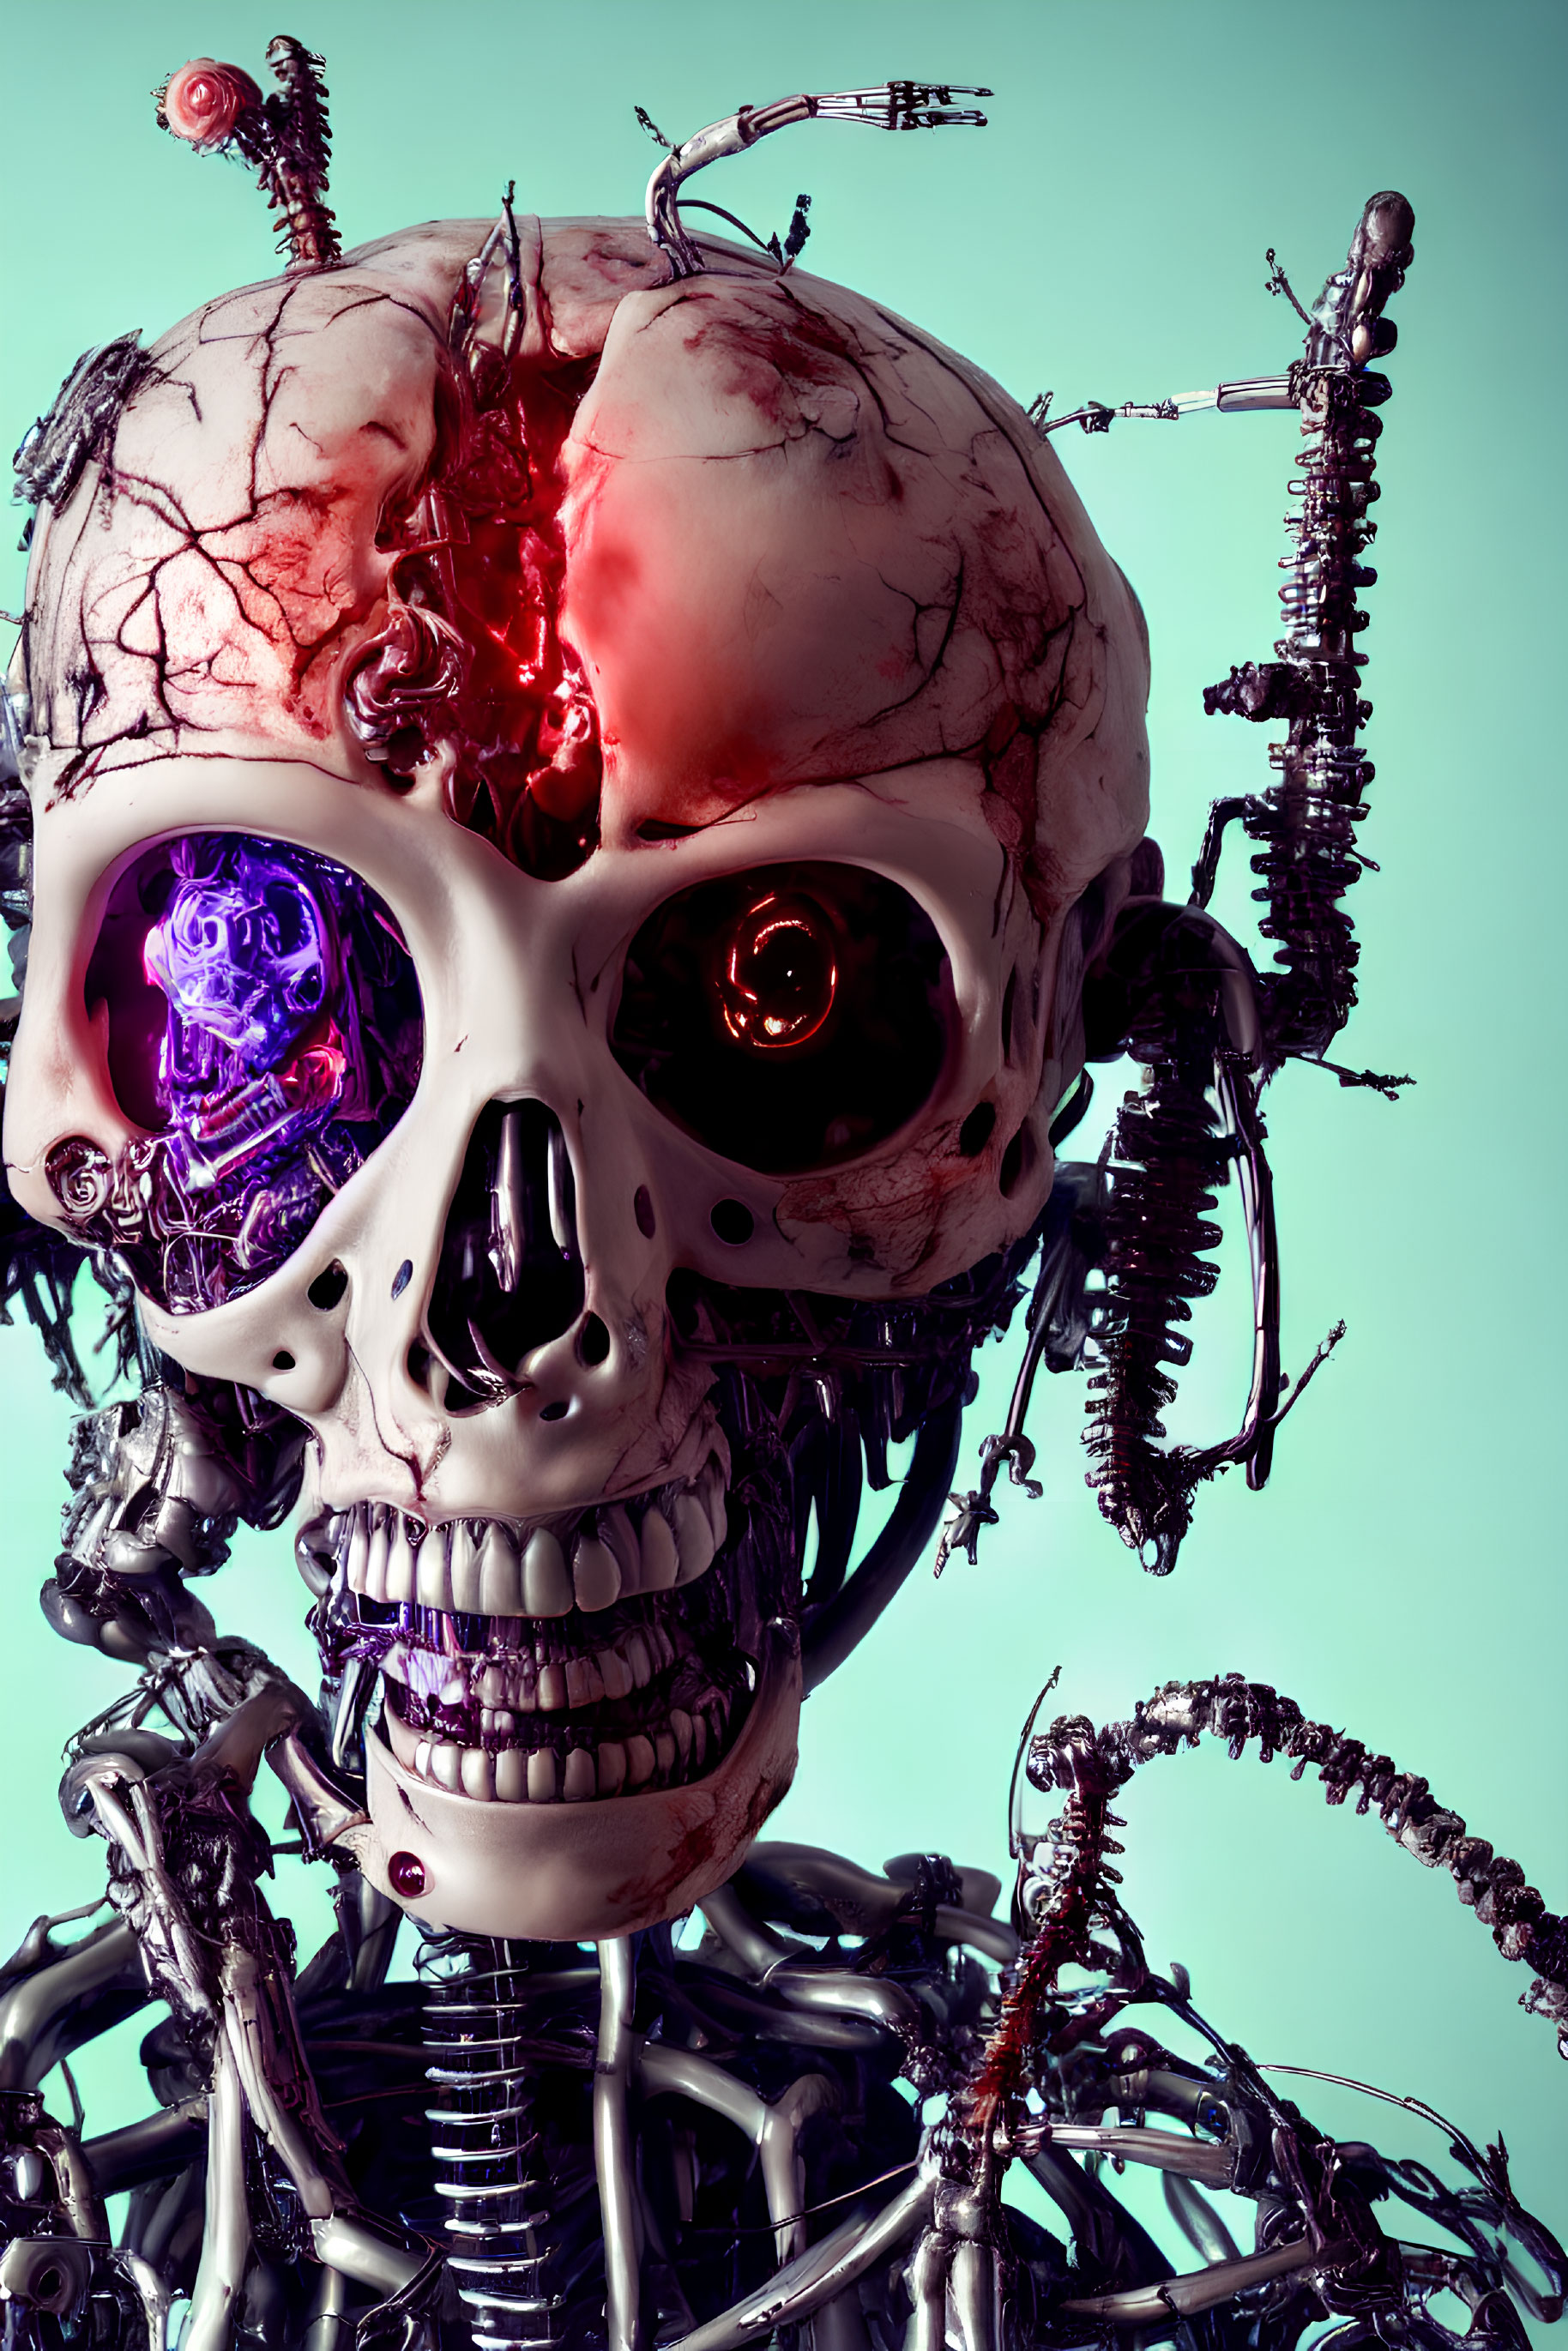 Detailed futuristic robotic skull with glowing red eye on turquoise backdrop